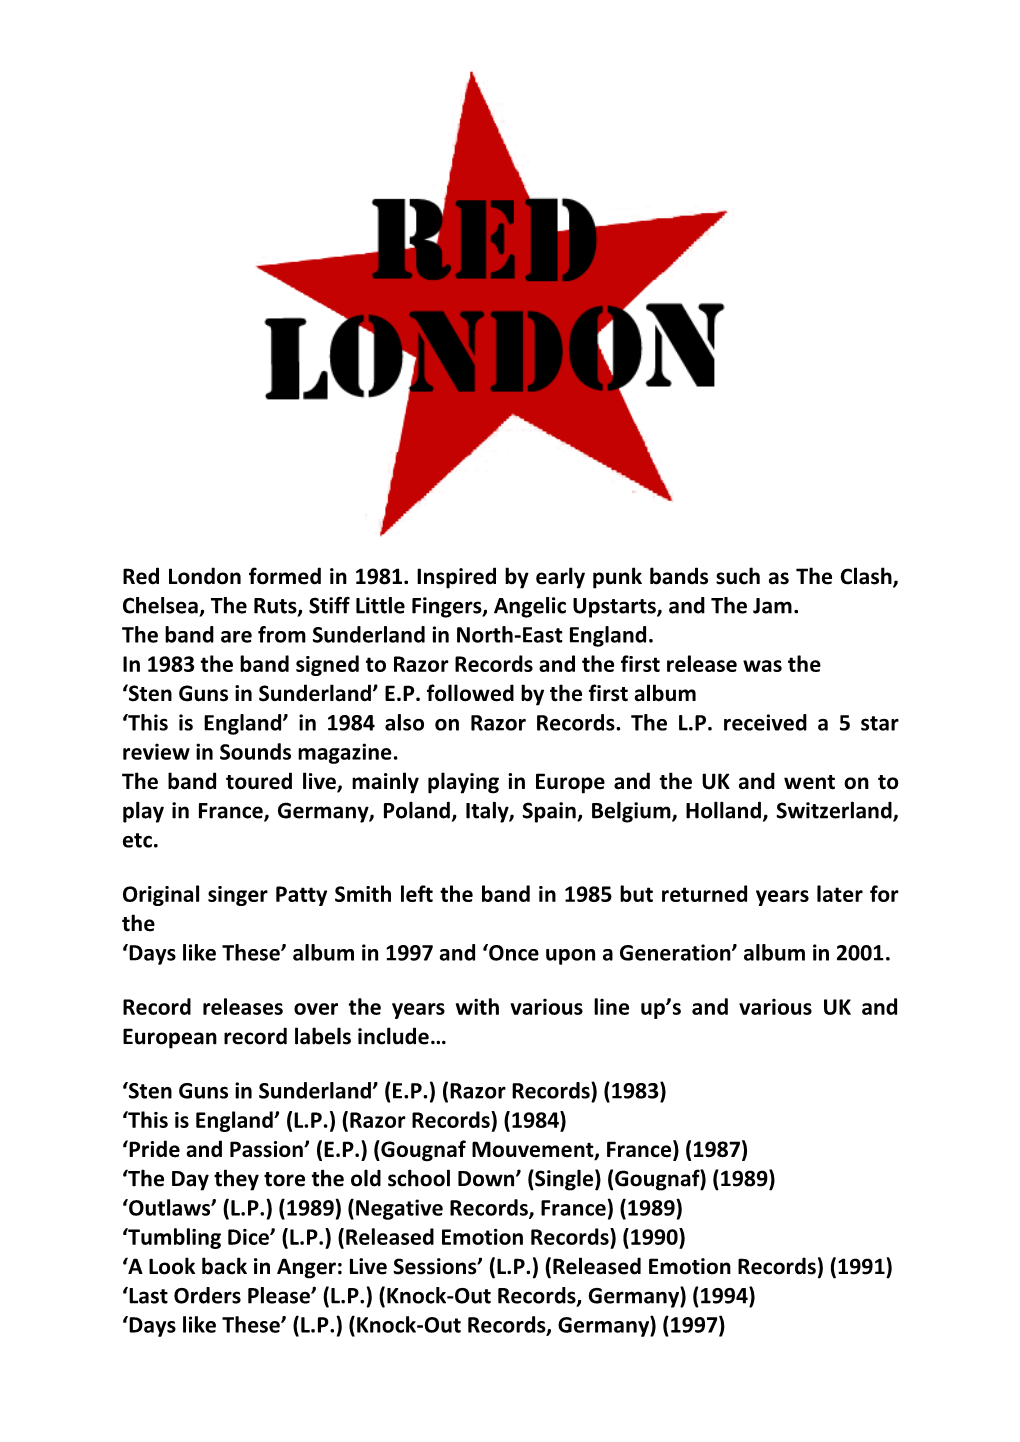 Red London Formed in 1981. Inspired by Early Punk Bands Such As the Clash, Chelsea, the Ruts, Stiff Little Fingers, Angelic Upstarts, and the Jam